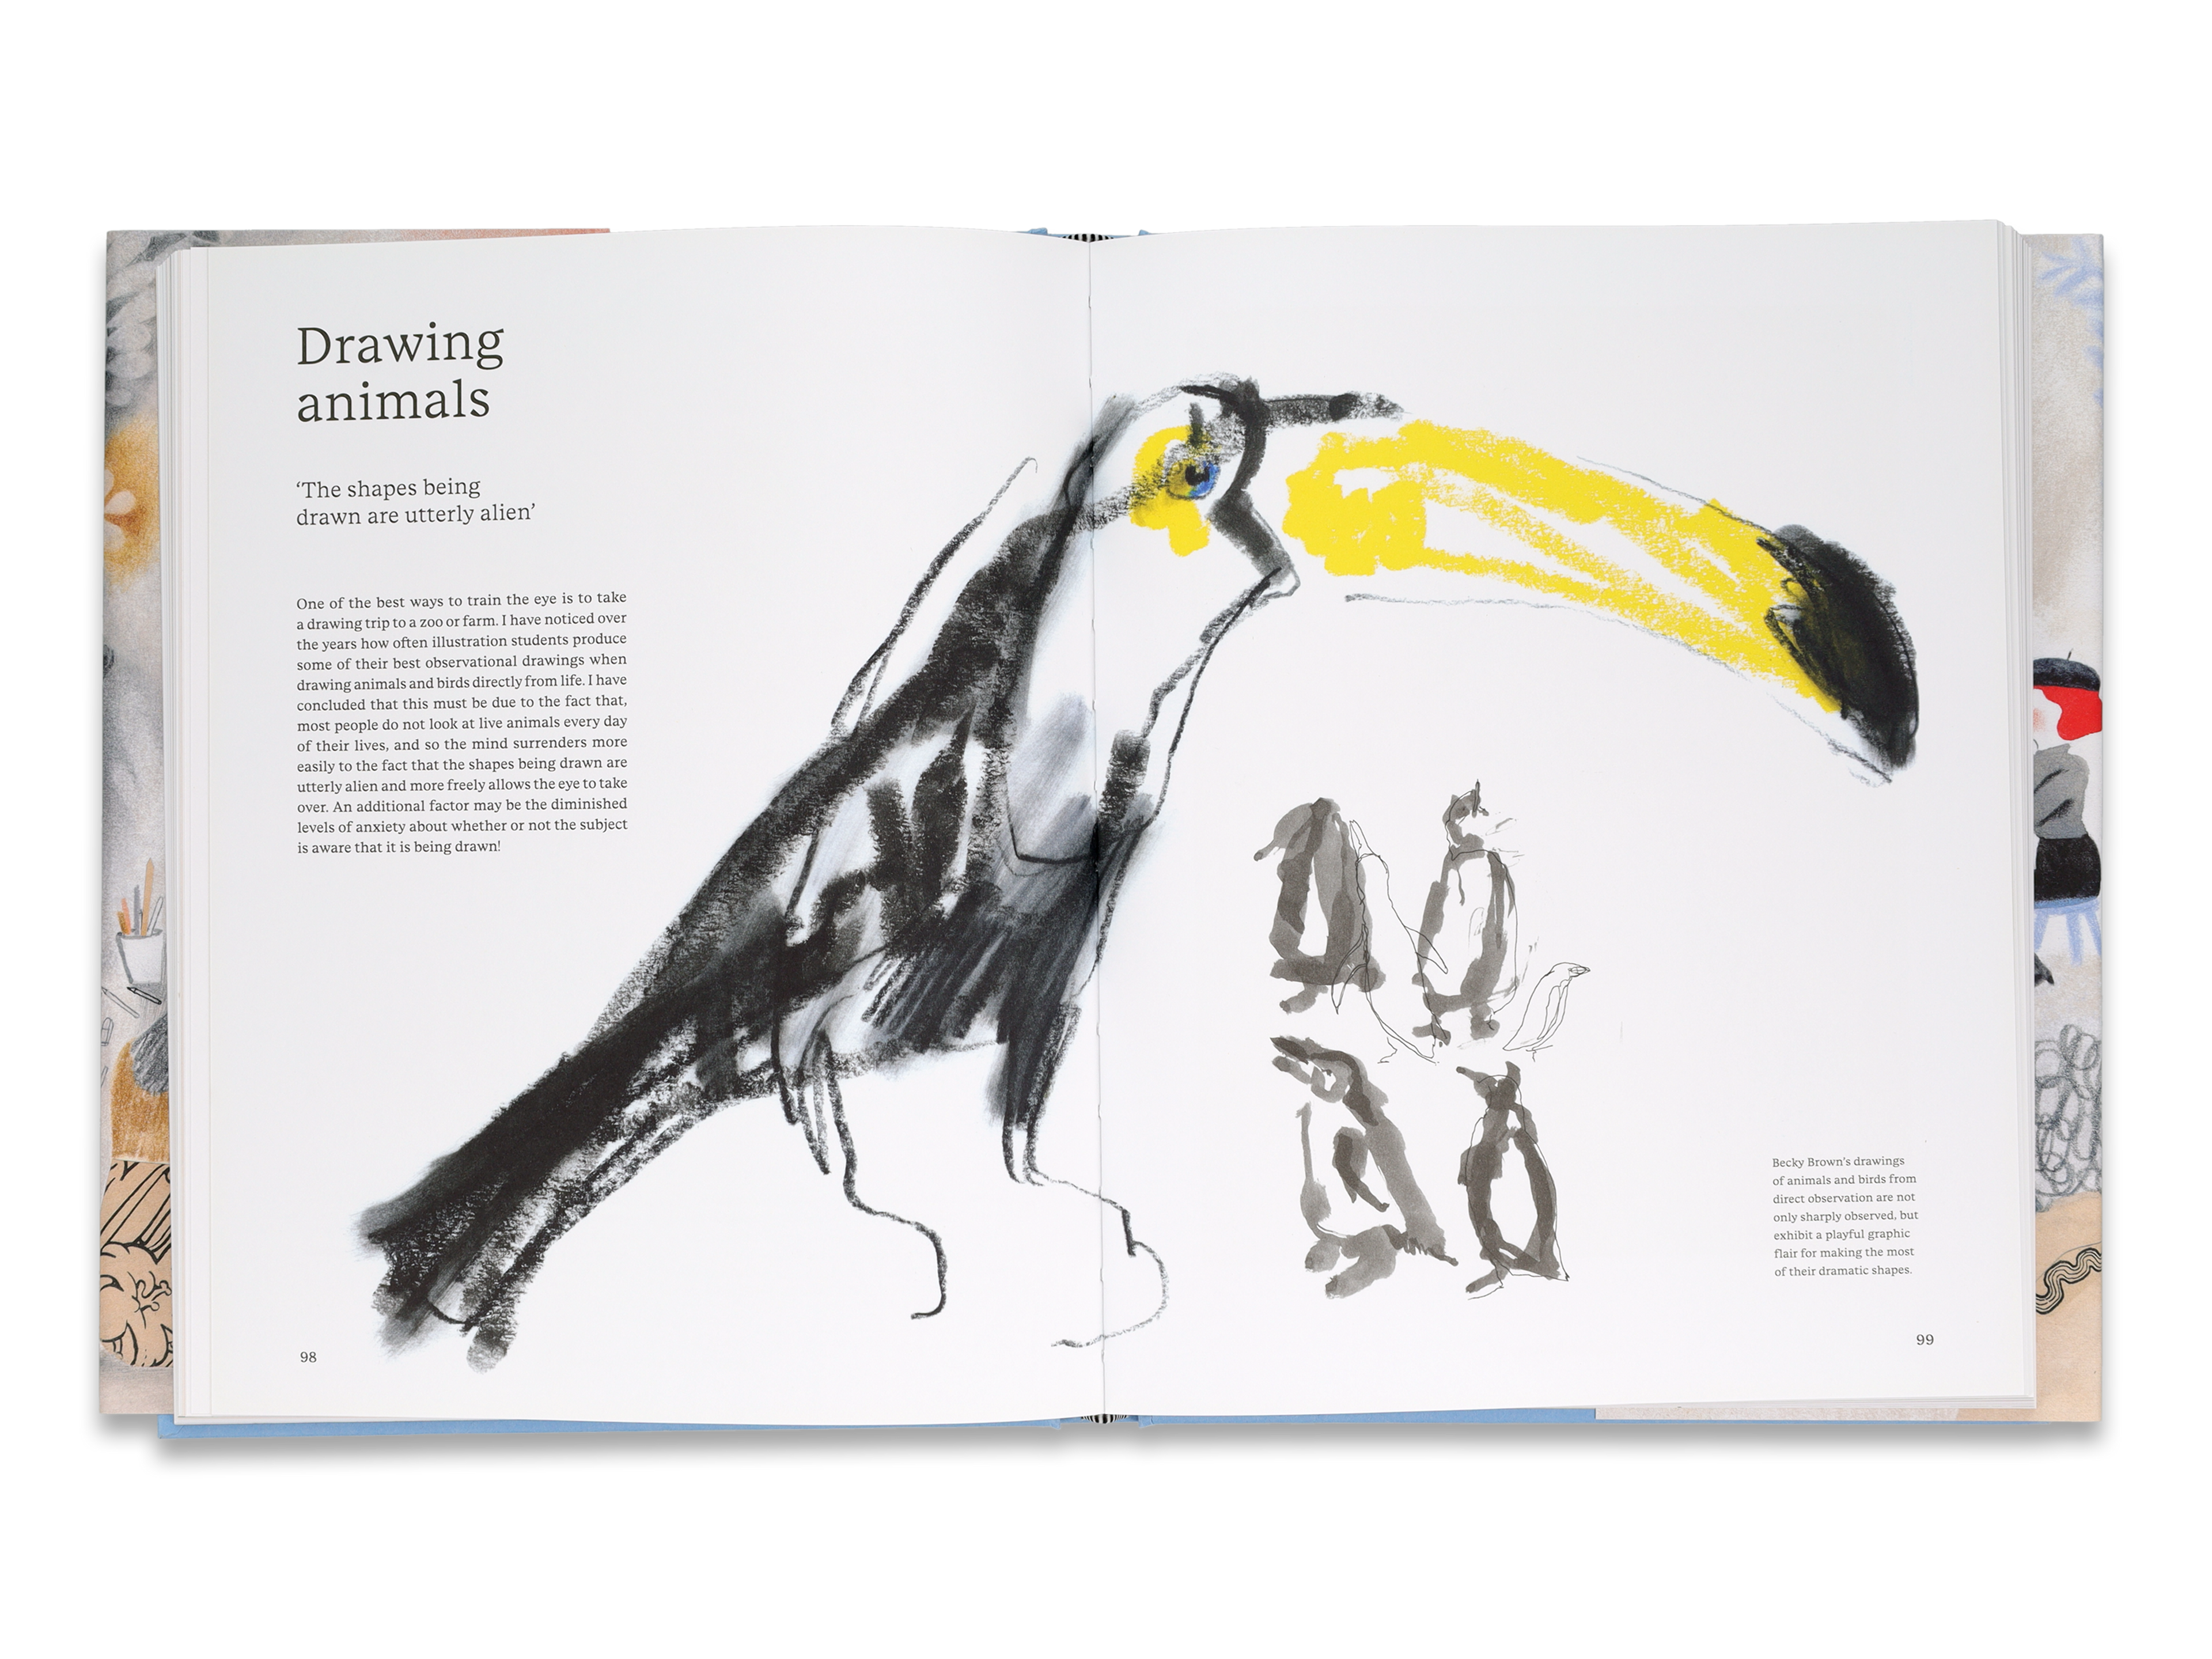 A spread featuring a drawing of a toucan with some text. The heading reads "Drawing animals".